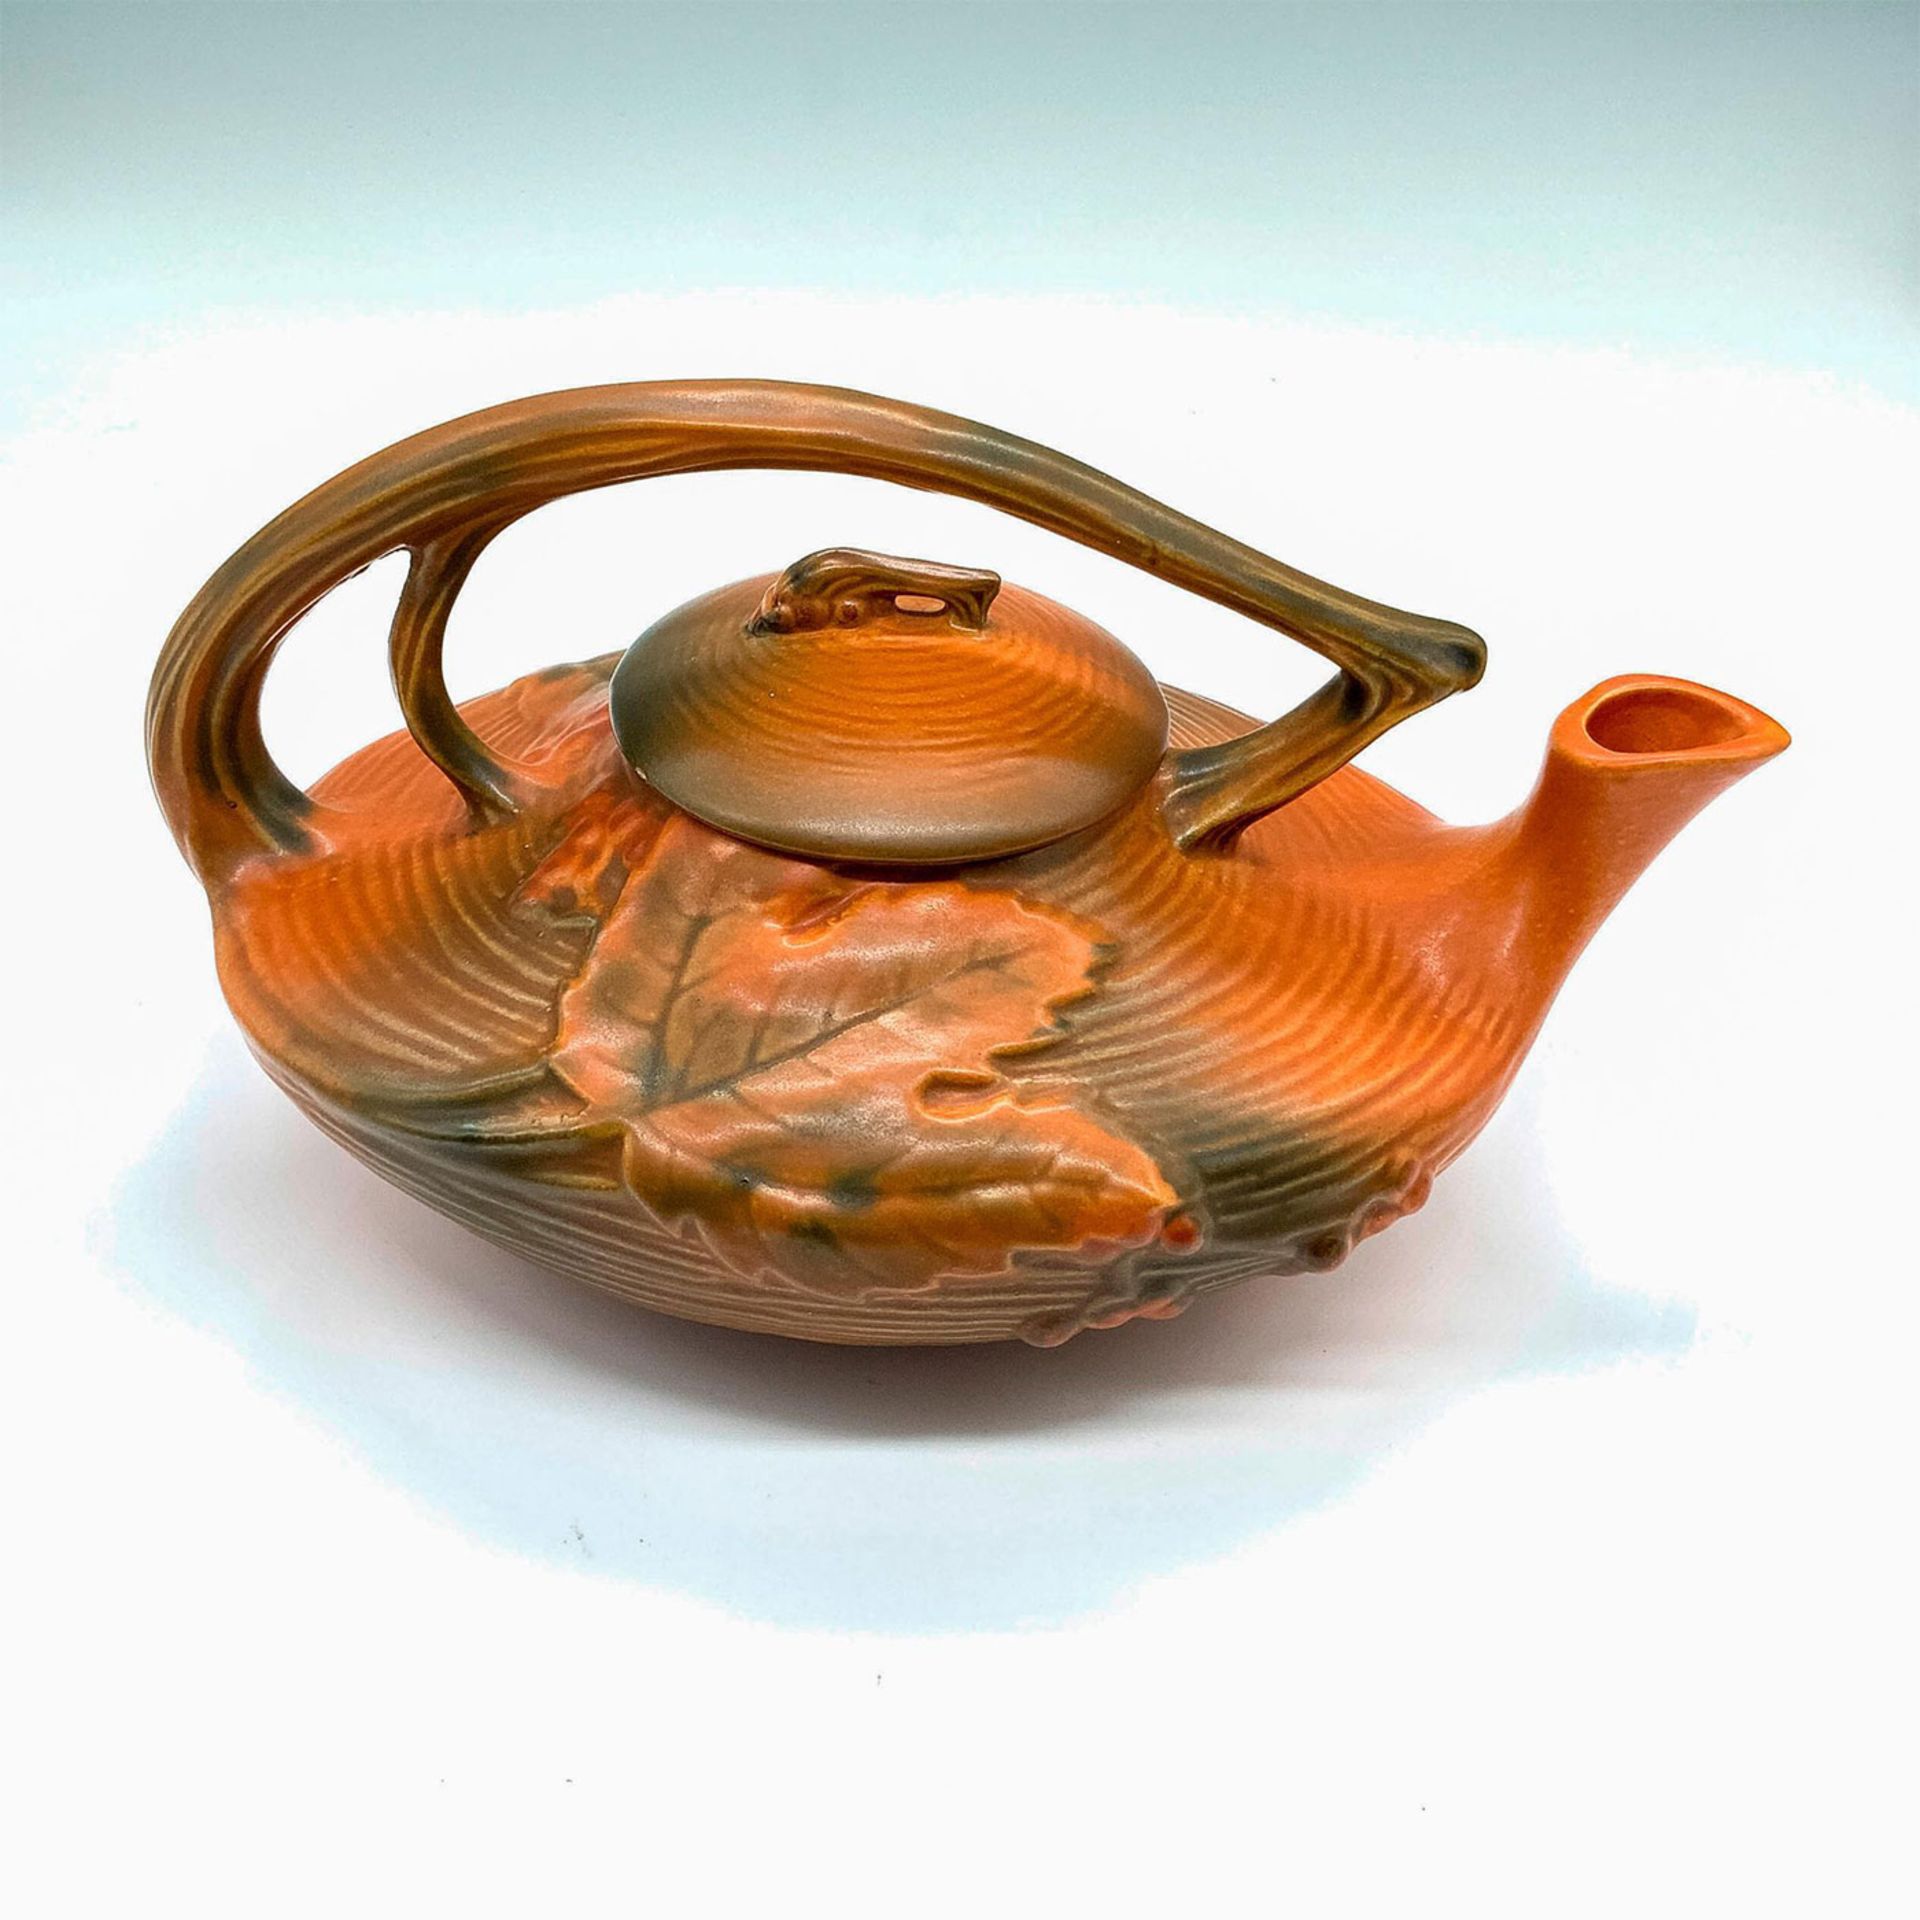 Roseville Pottery Teapot, Bushberry Brown - Image 2 of 3